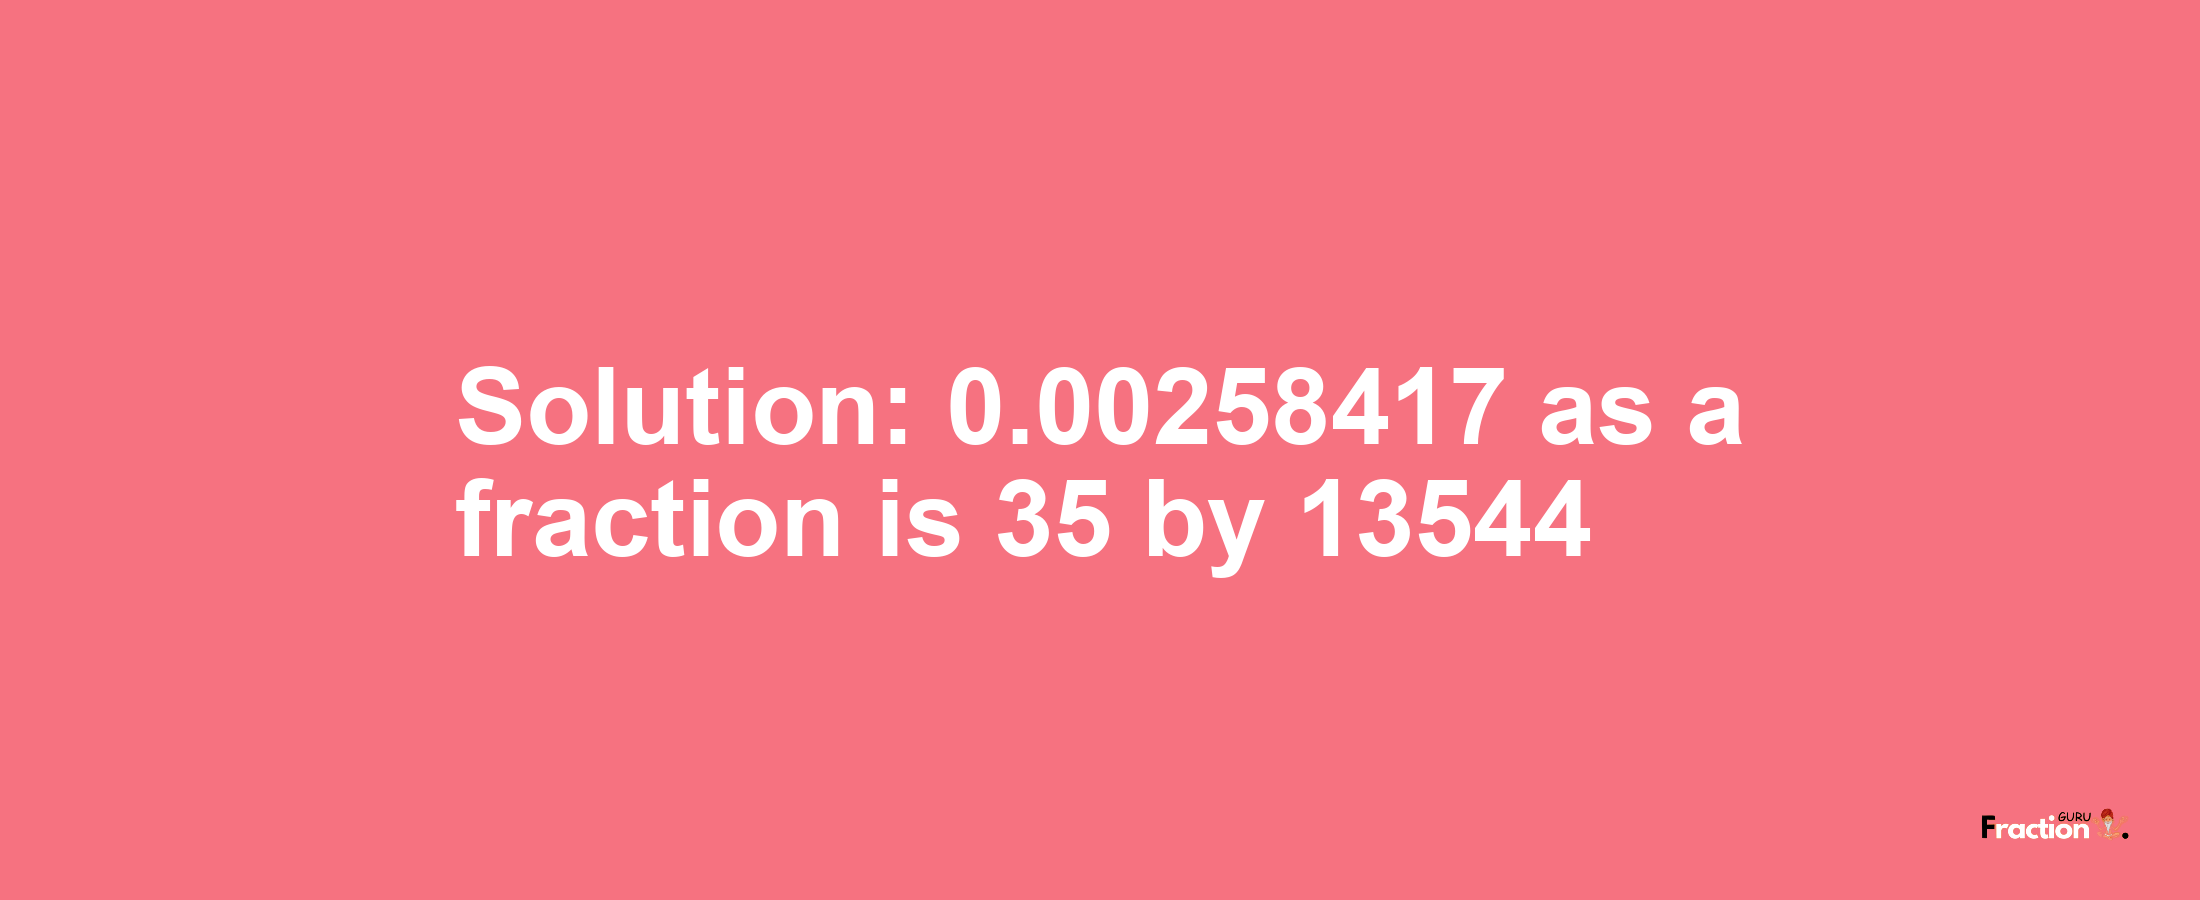 Solution:0.00258417 as a fraction is 35/13544